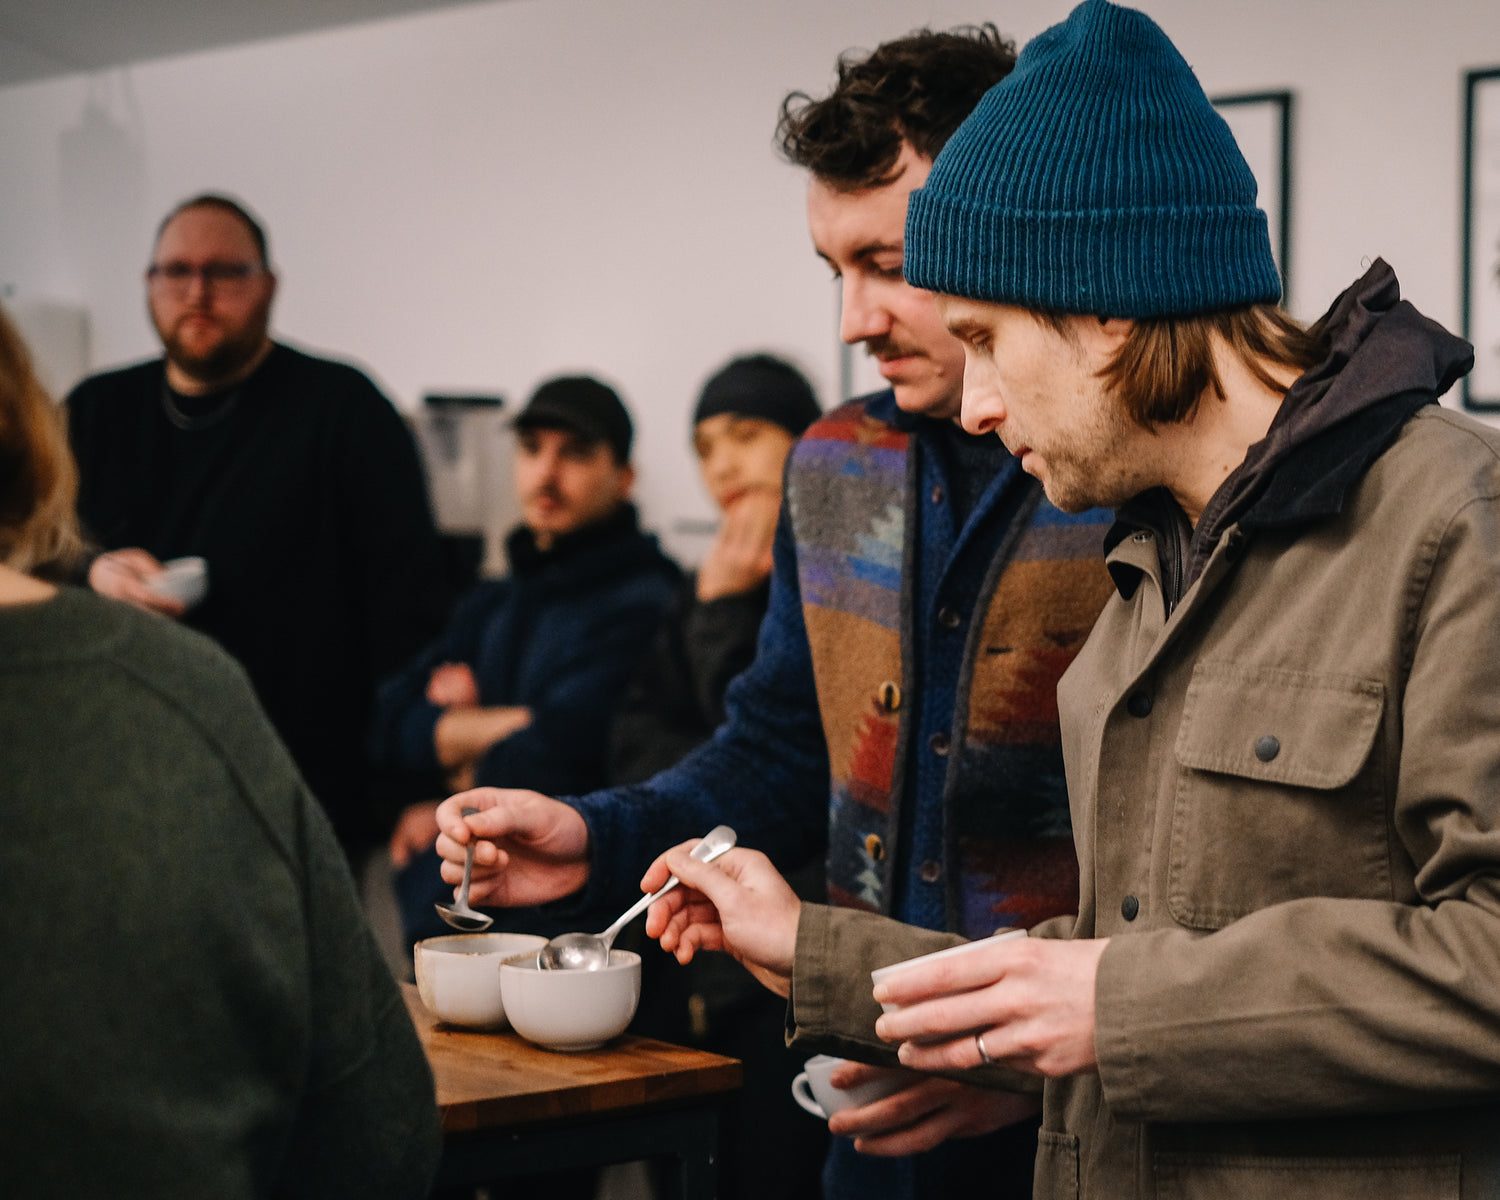 People taking part in a team coffee cupping.